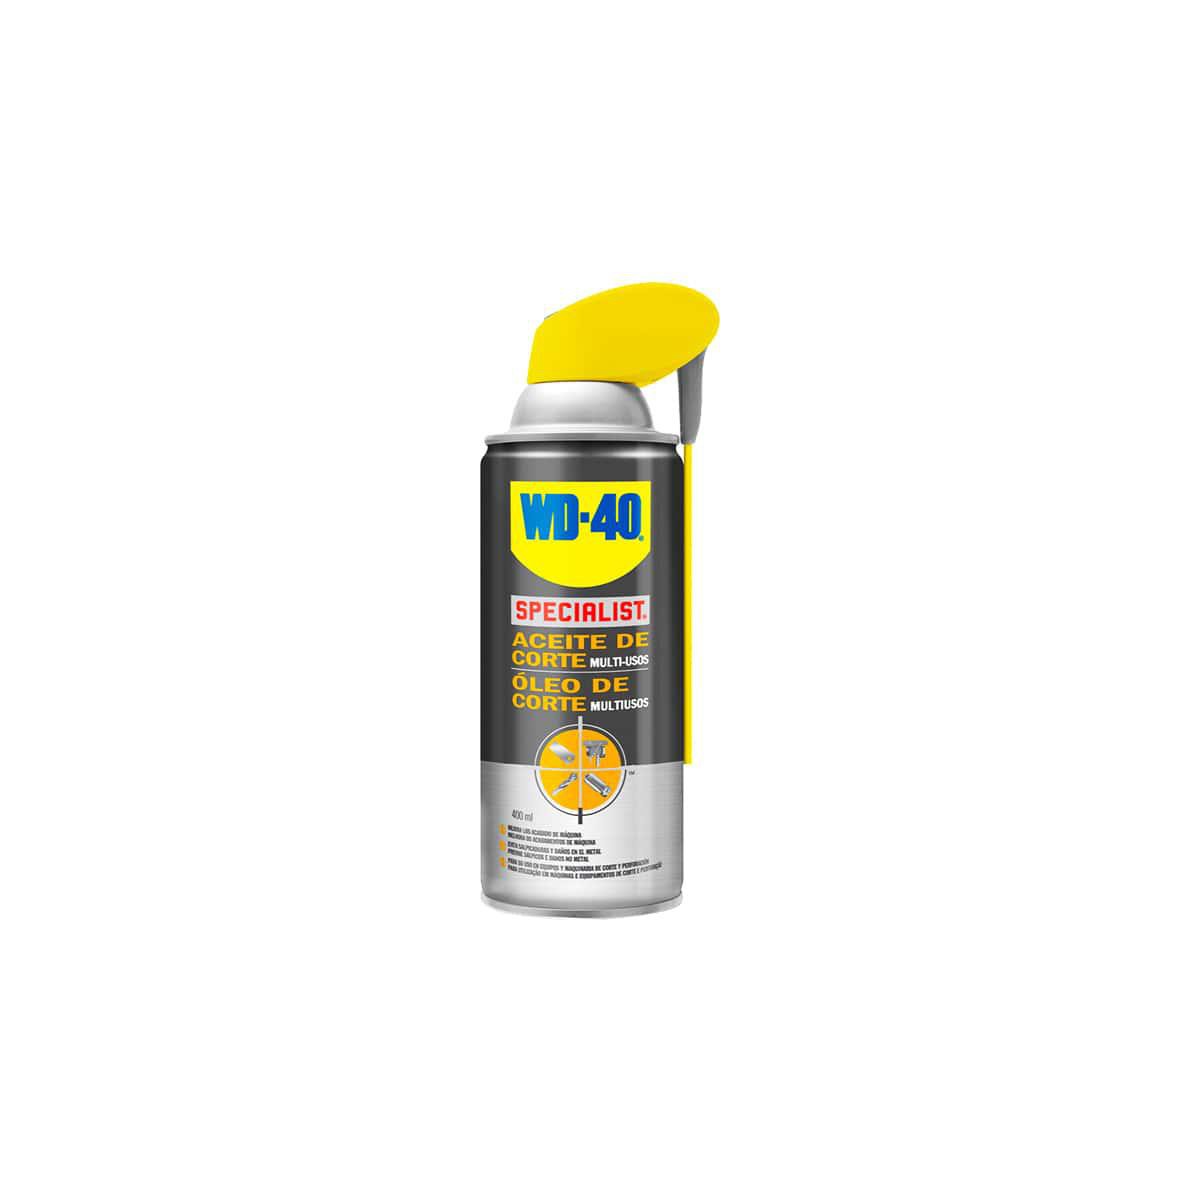 Wd40 - Huile de coupe WD40 spray 400ml - Mastic, silicone, joint